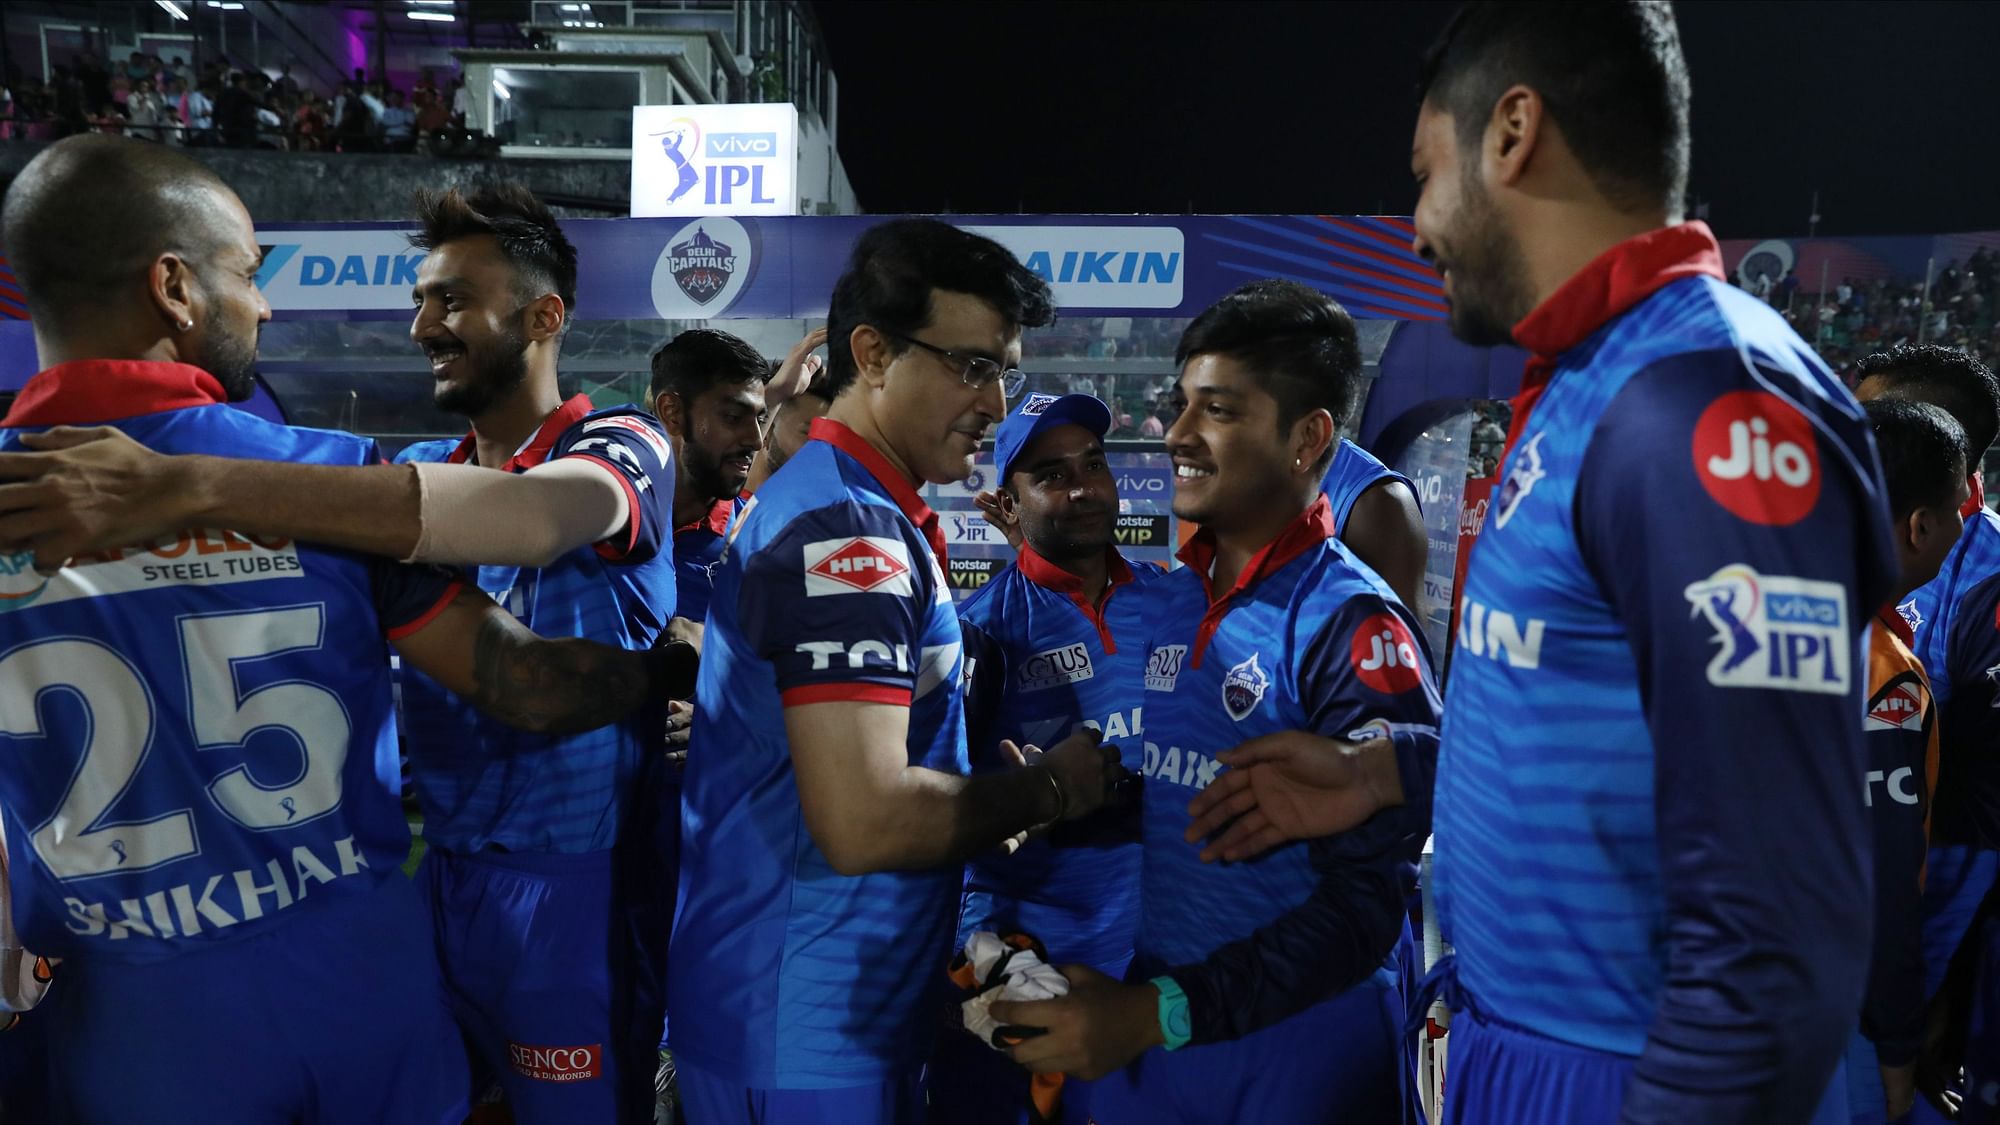 With this win Delhi now climbed up to the top of points table, with 14 points in 10 games, ahead of CSK on the net run rate.